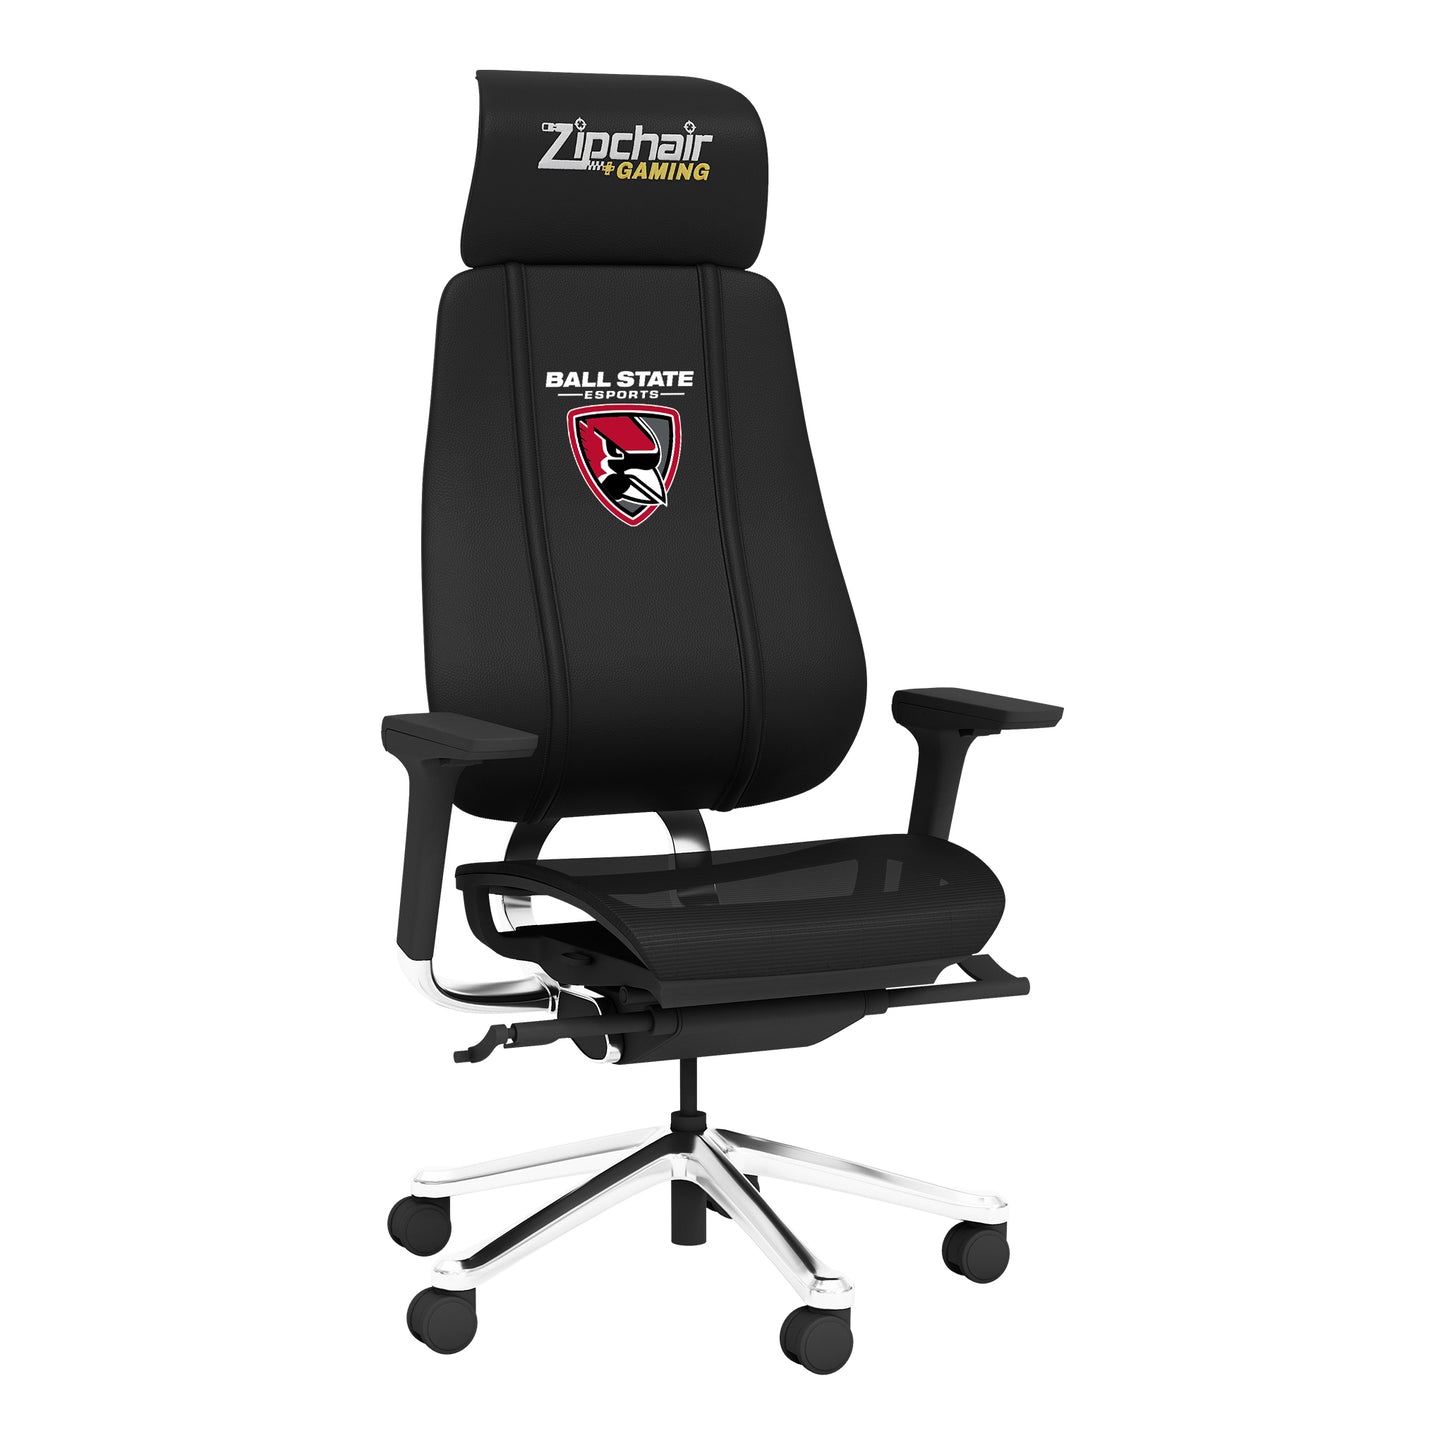 PhantomX Gaming Chair with Ball State Esports